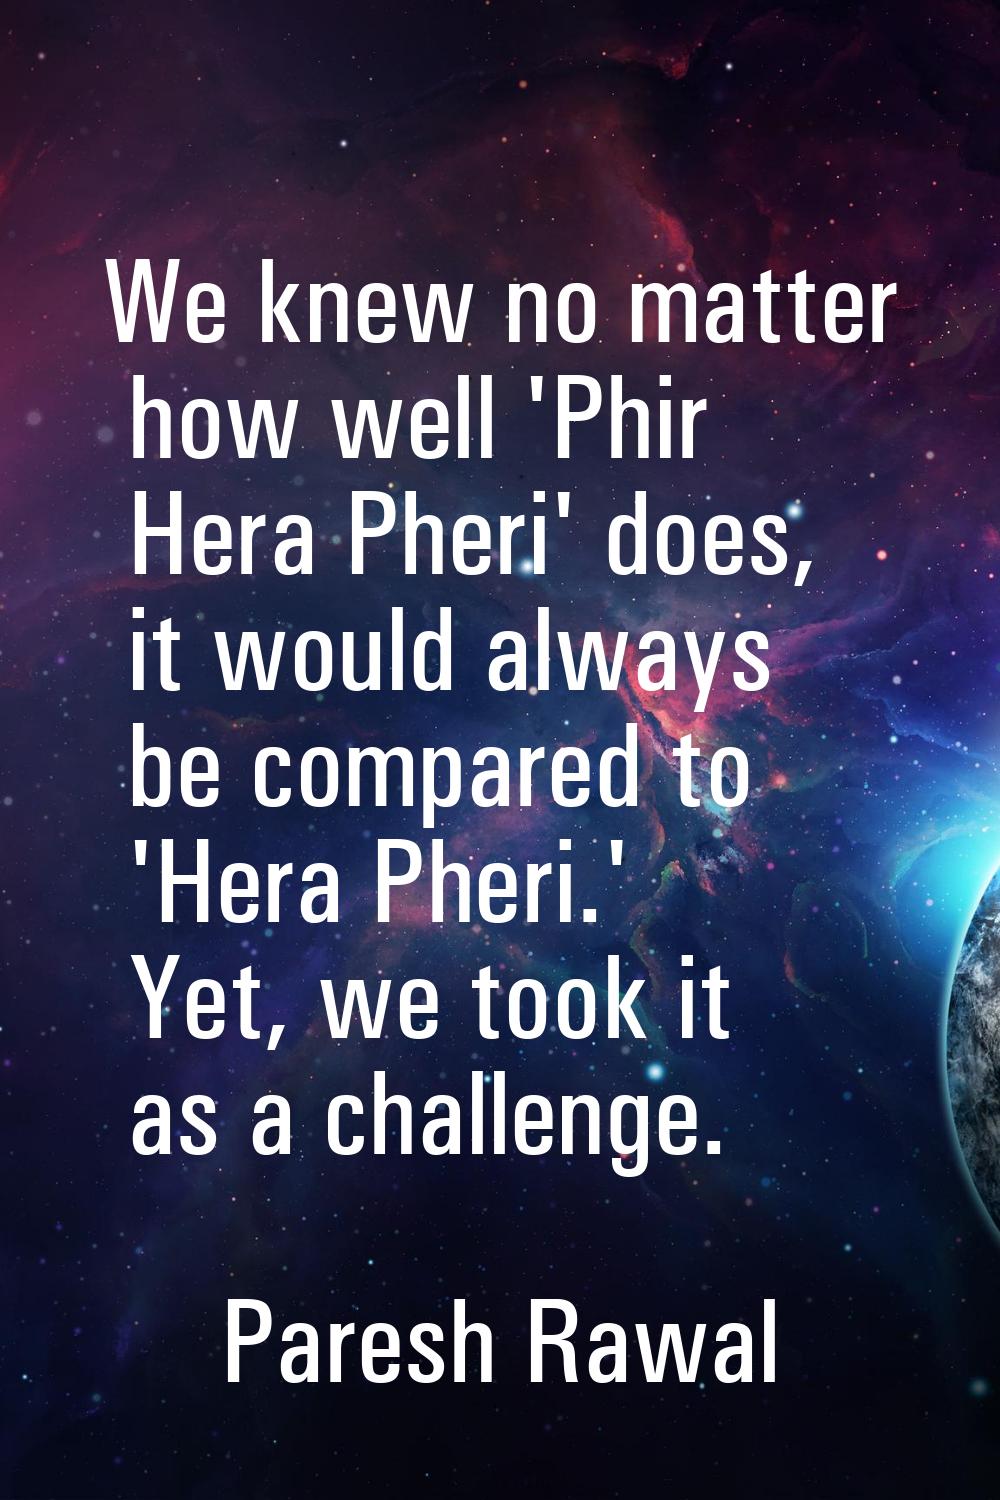 We knew no matter how well 'Phir Hera Pheri' does, it would always be compared to 'Hera Pheri.' Yet